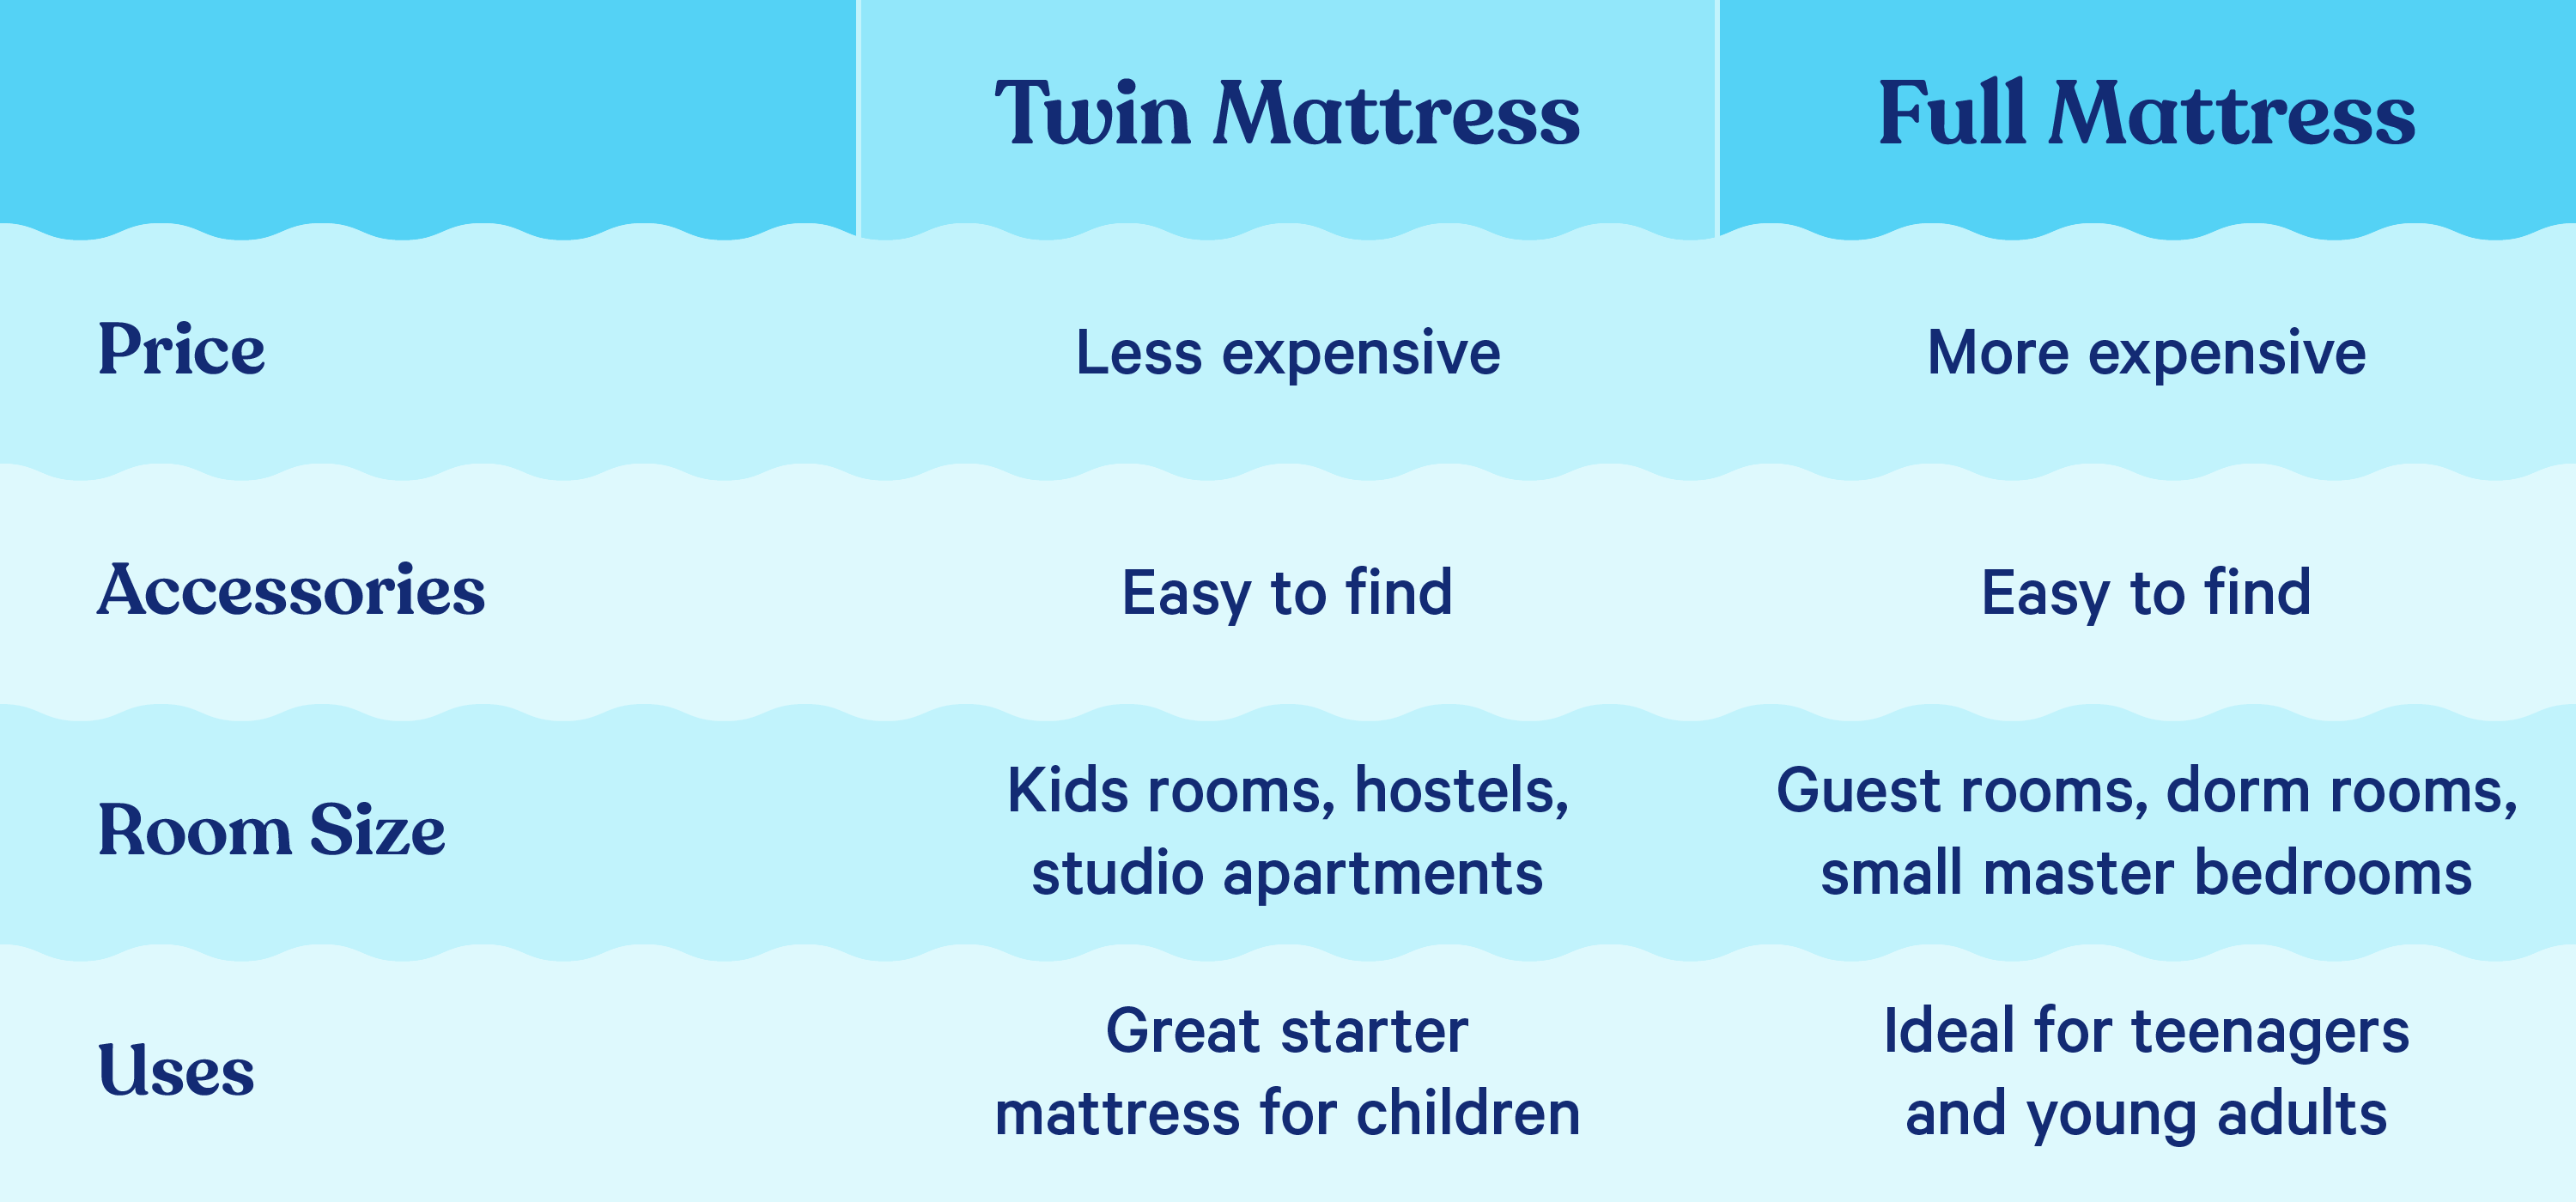 Chart showing differences between Full and Twin Mattresses (Price, Accessories, Room Size, and Uses)